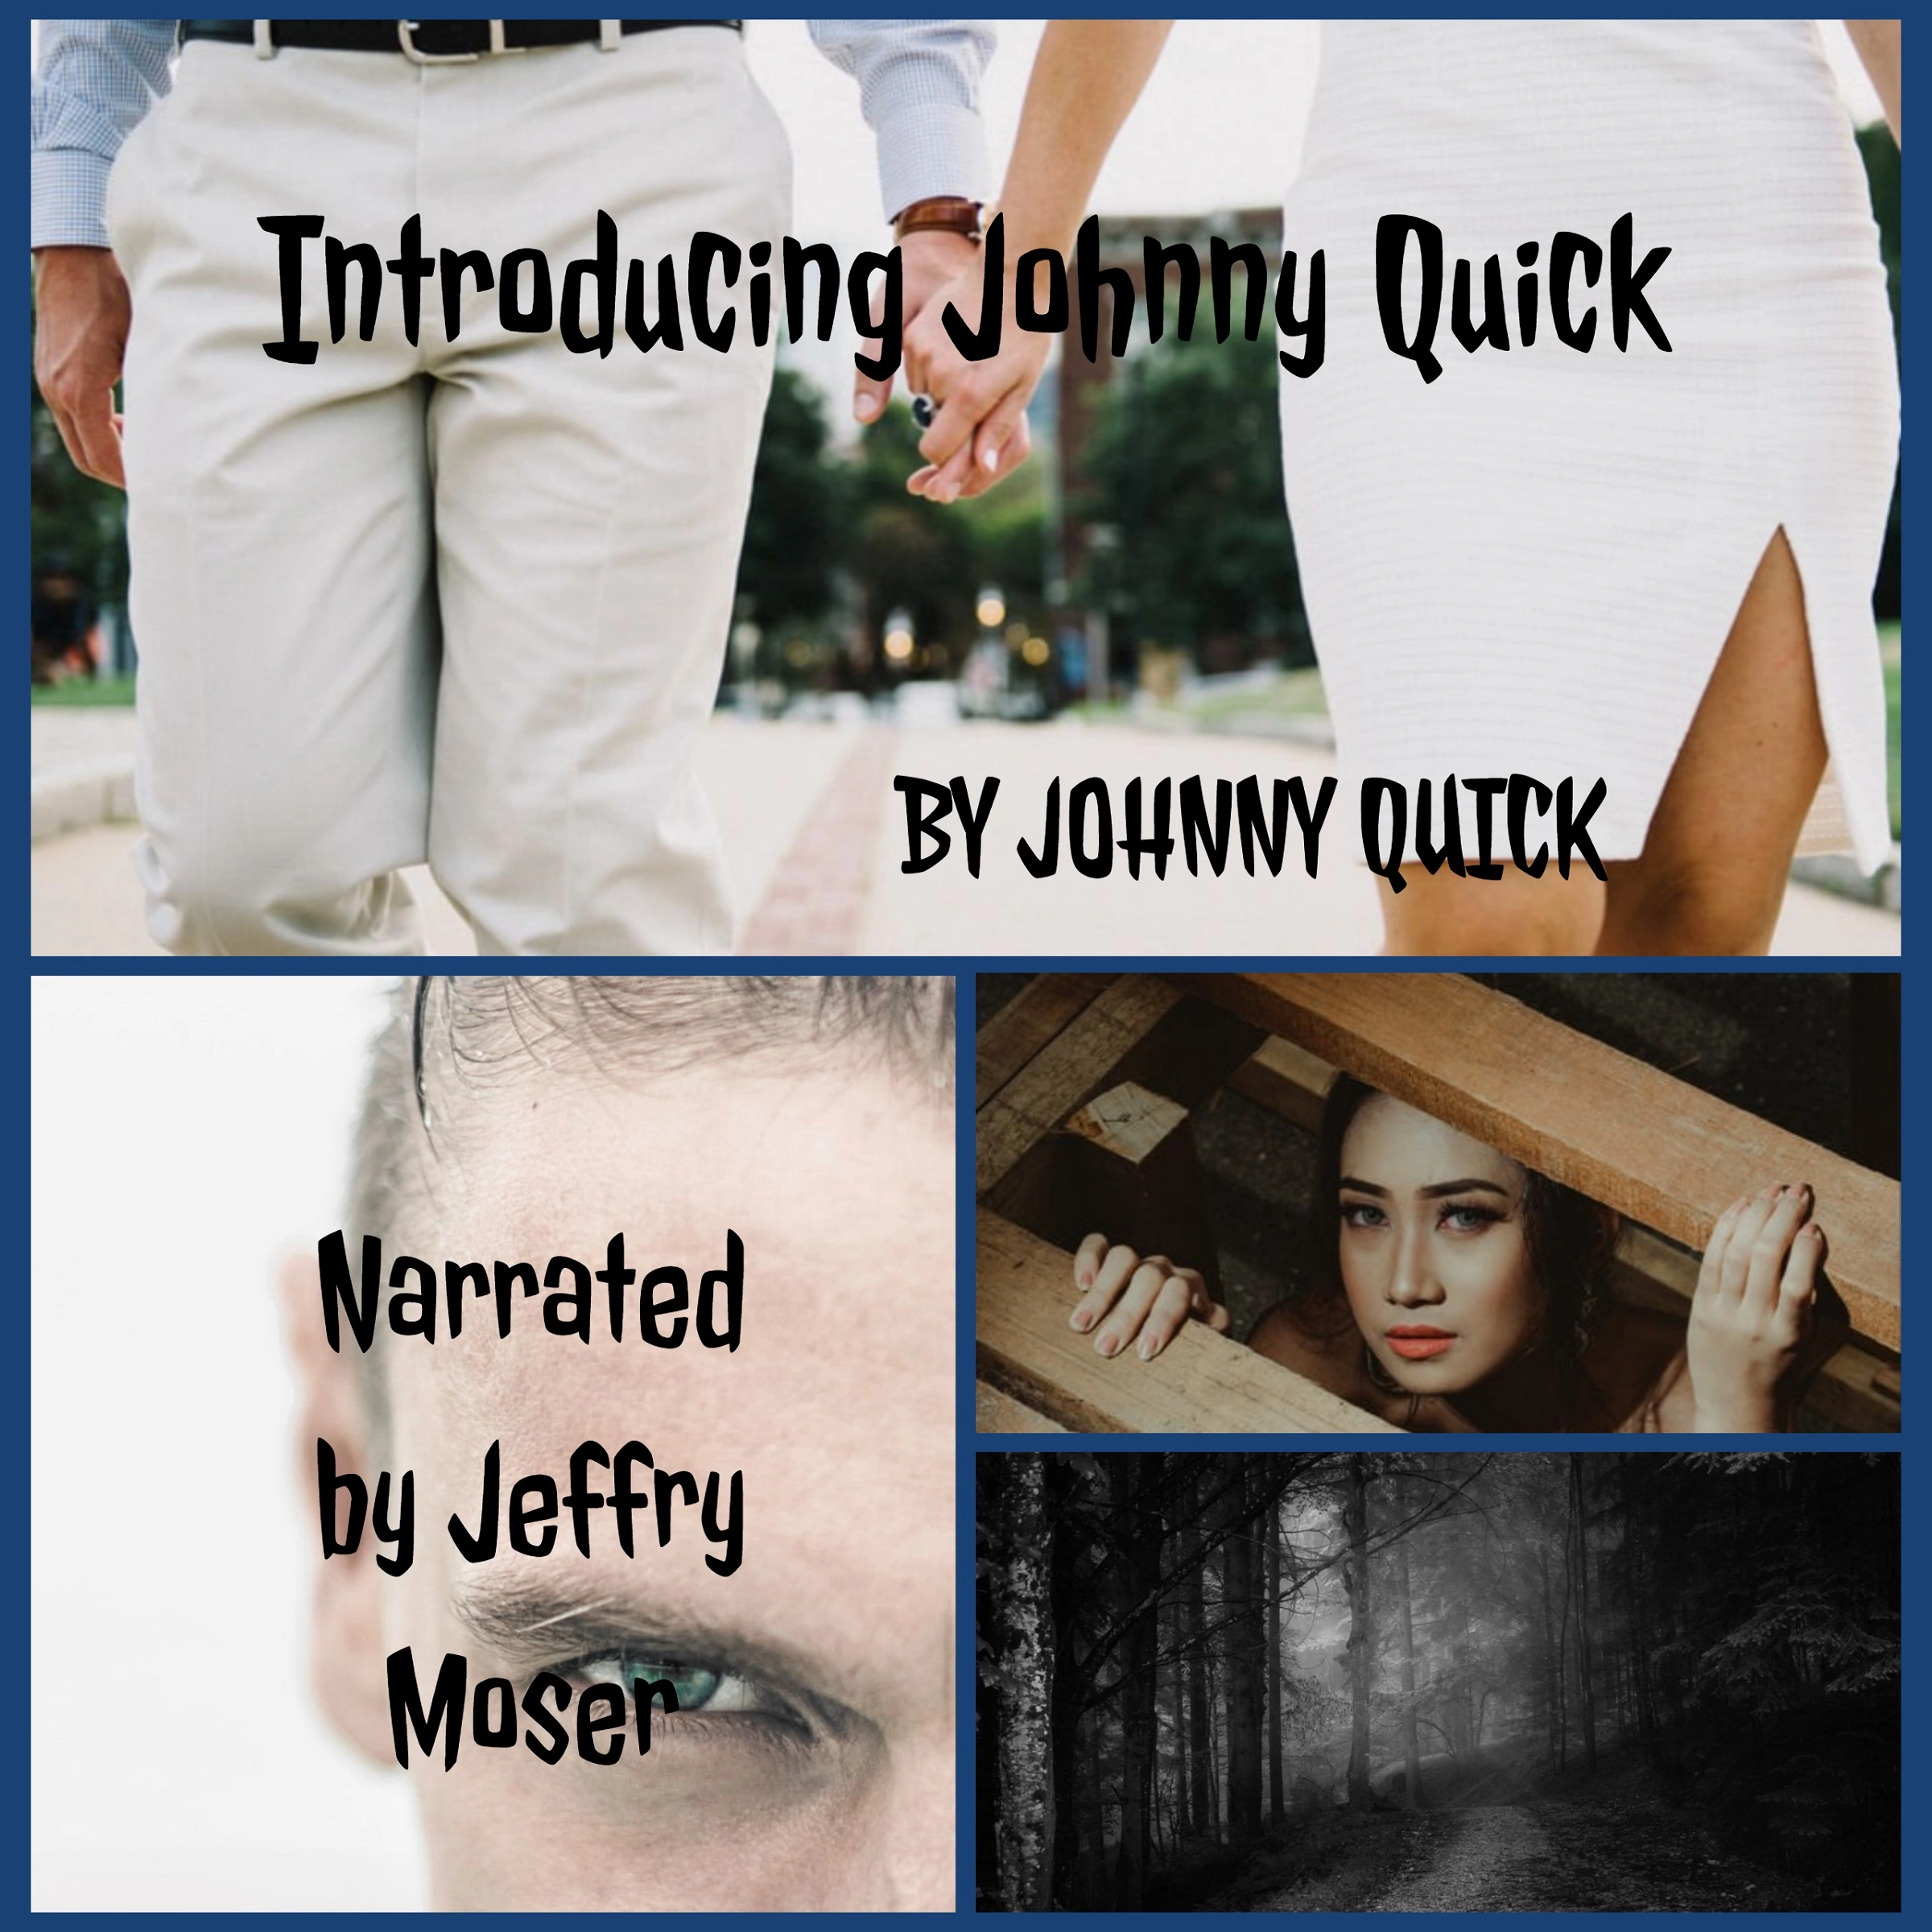 Introducing Johnny Quick Audiobook by Johnny Quick